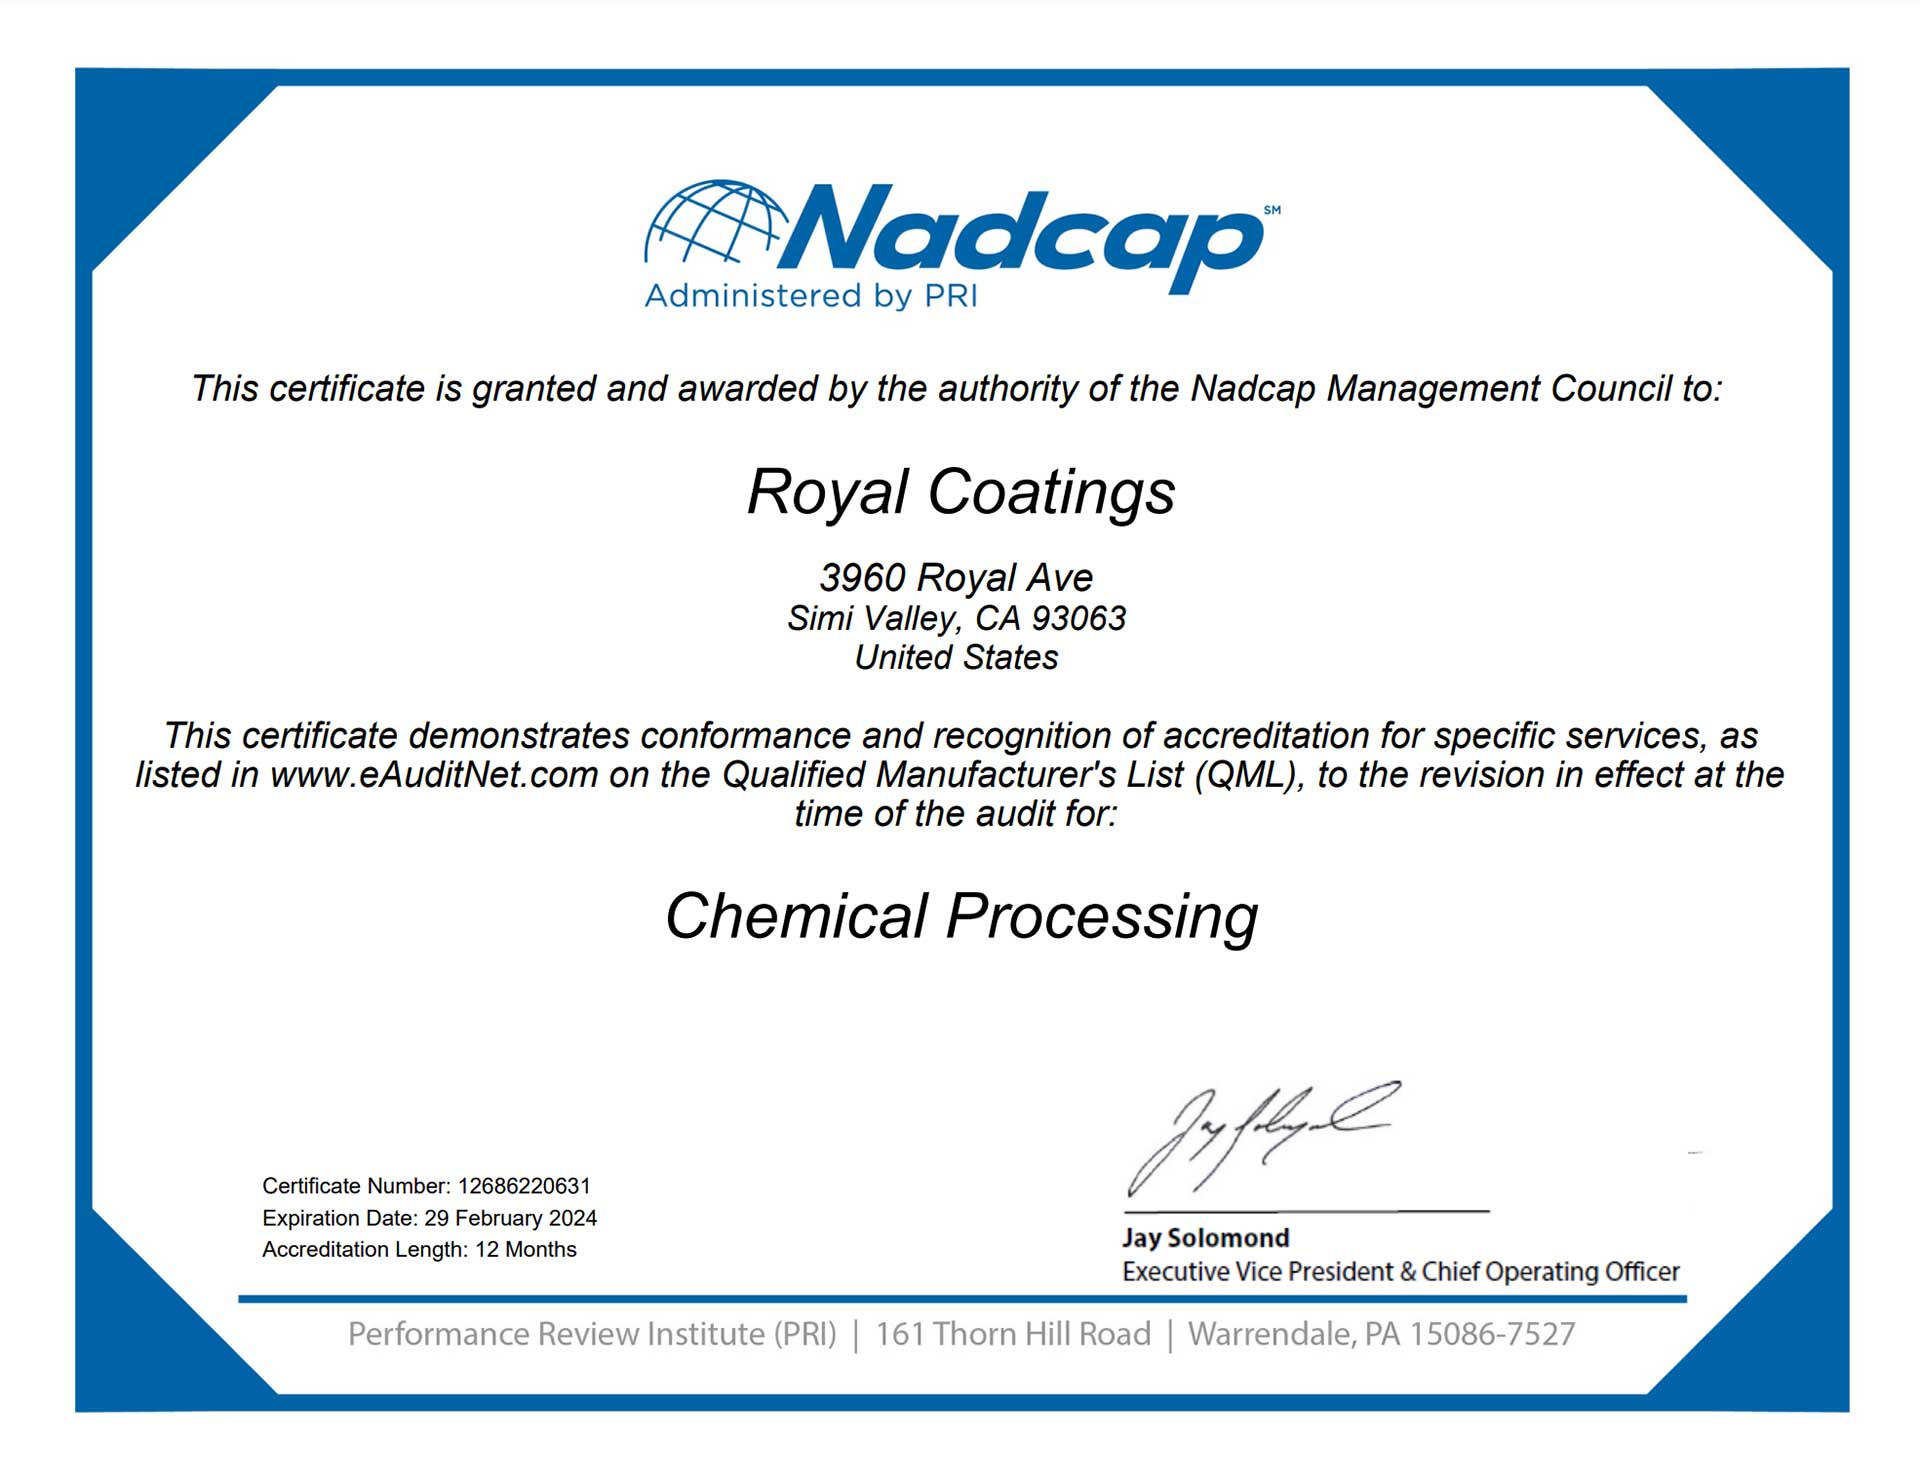 Nadcap Chemical Processing Accredited